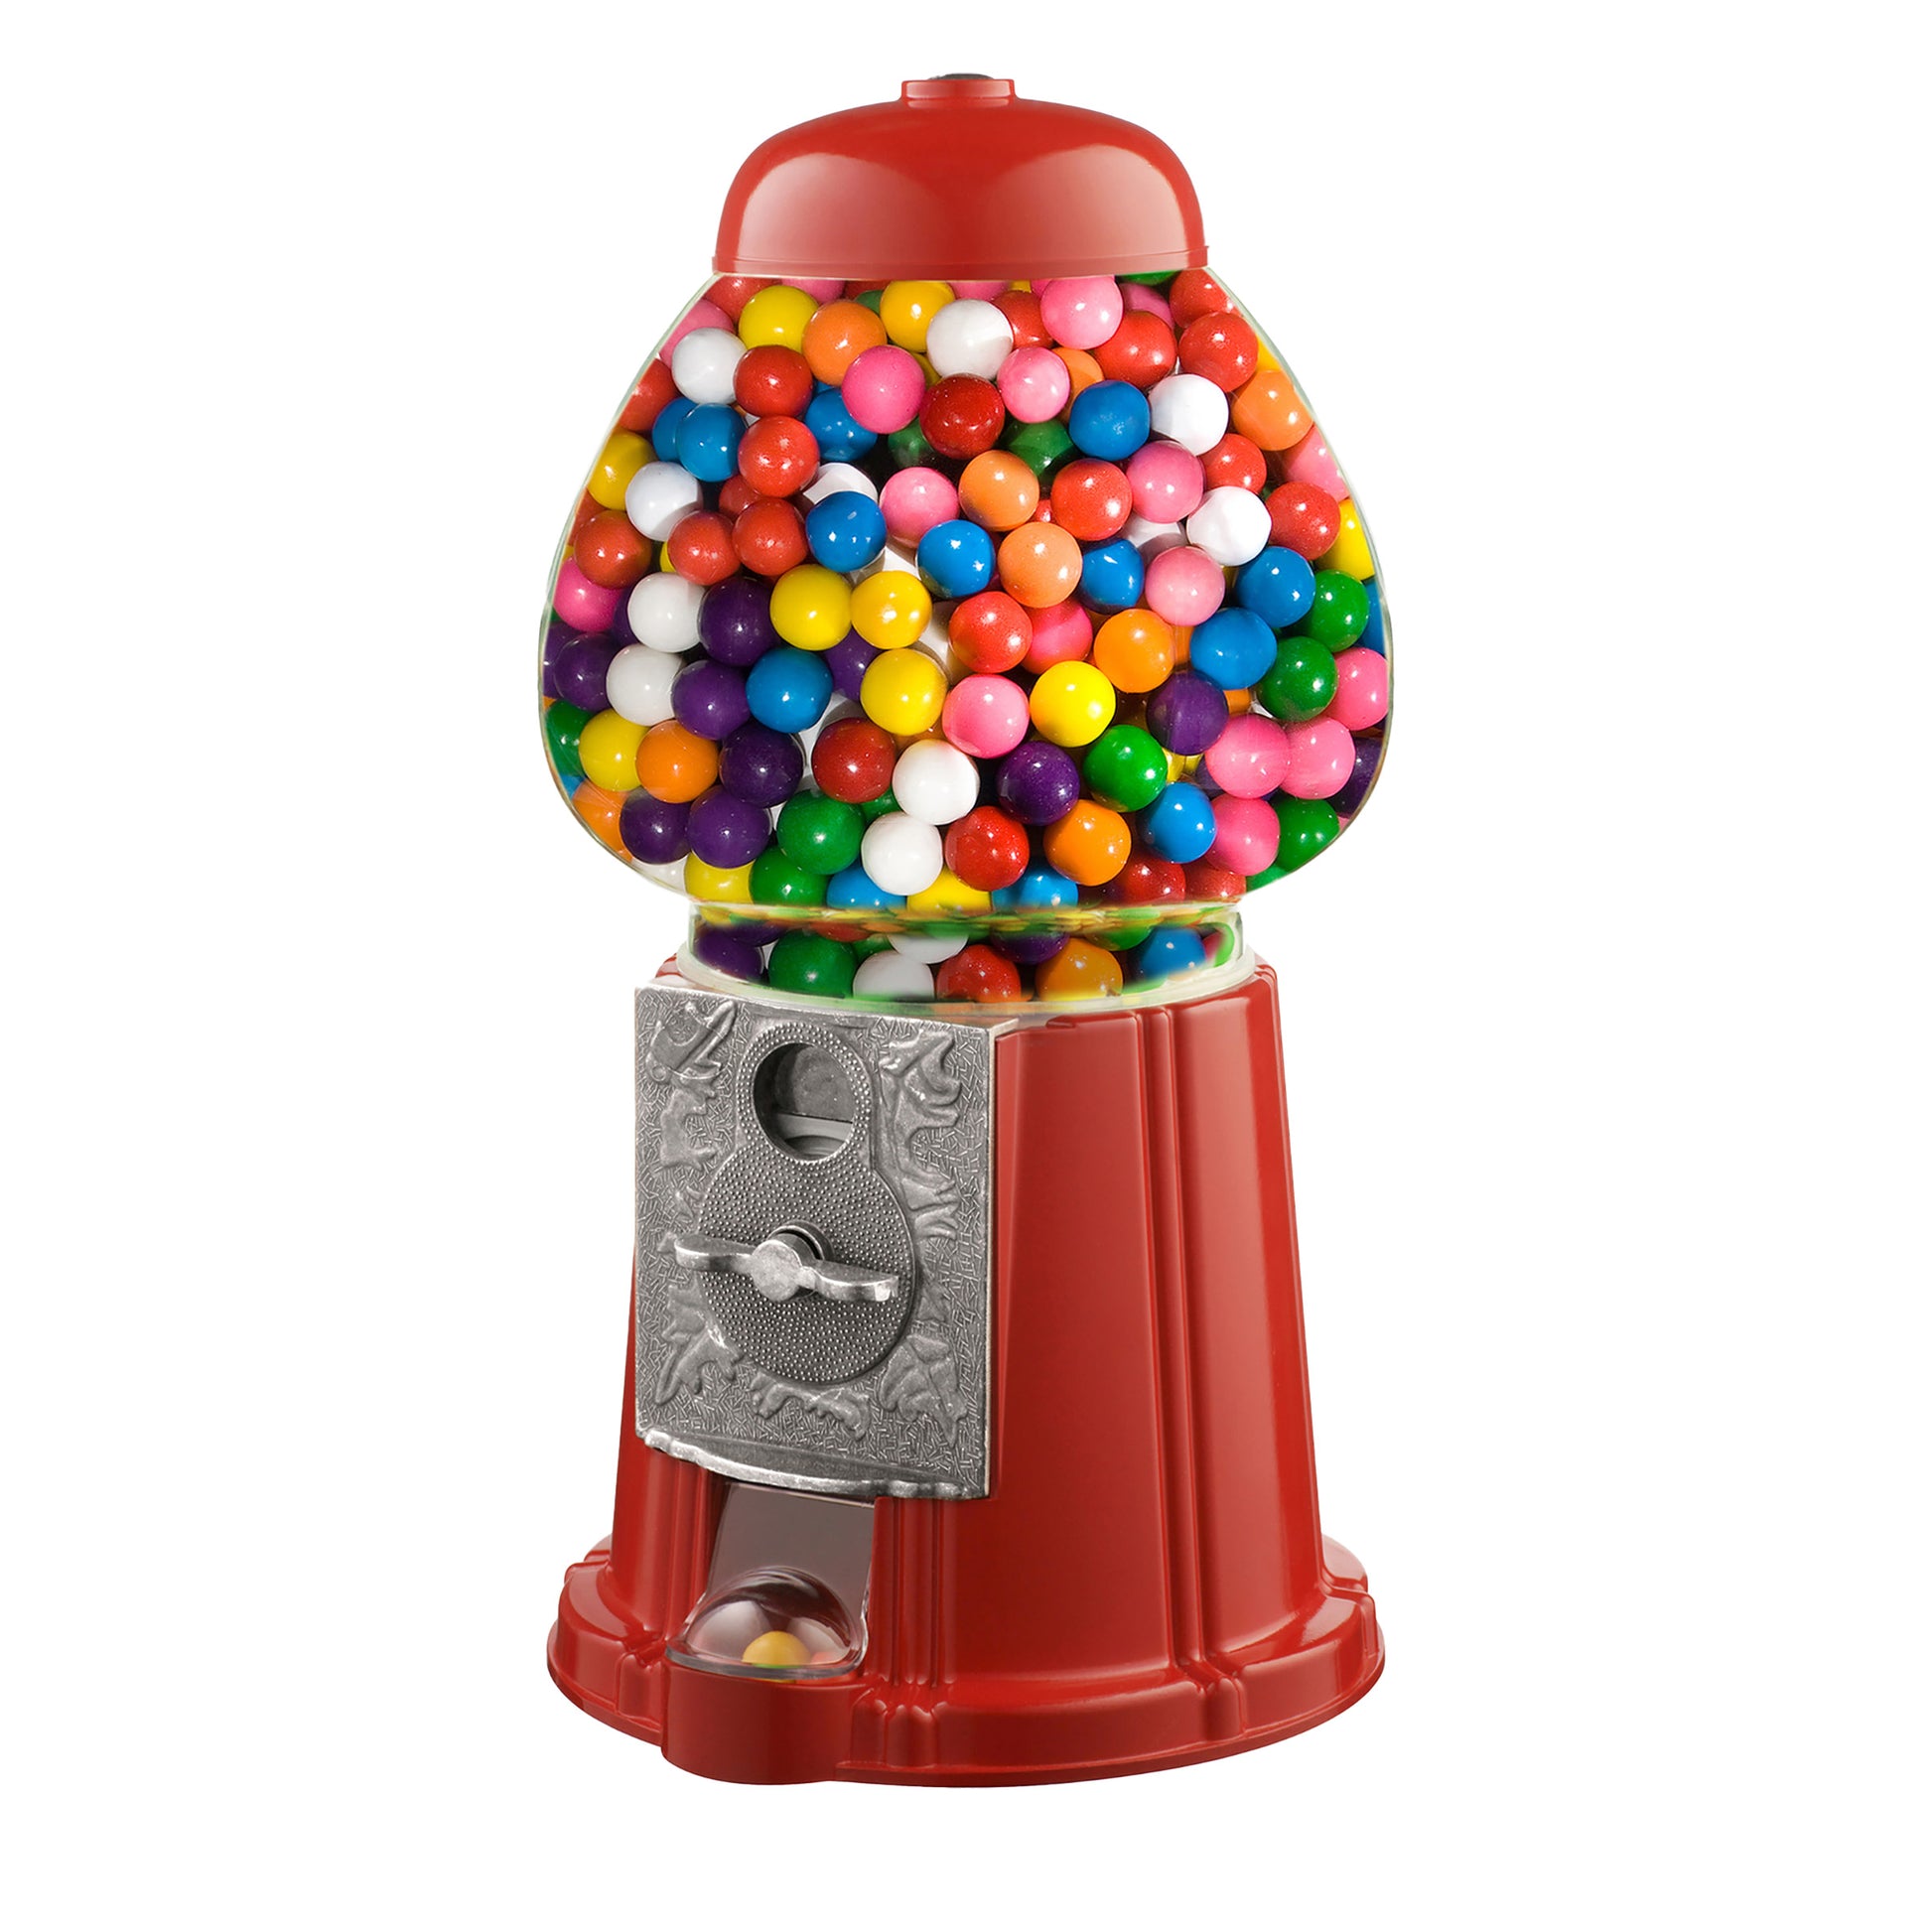 Gumball Machine with Stand - 15-inch Vintage Metal and Glass Candy  Dispenser Machine Coin Operated Bank with Free Spin by Great Northern  Popcorn 